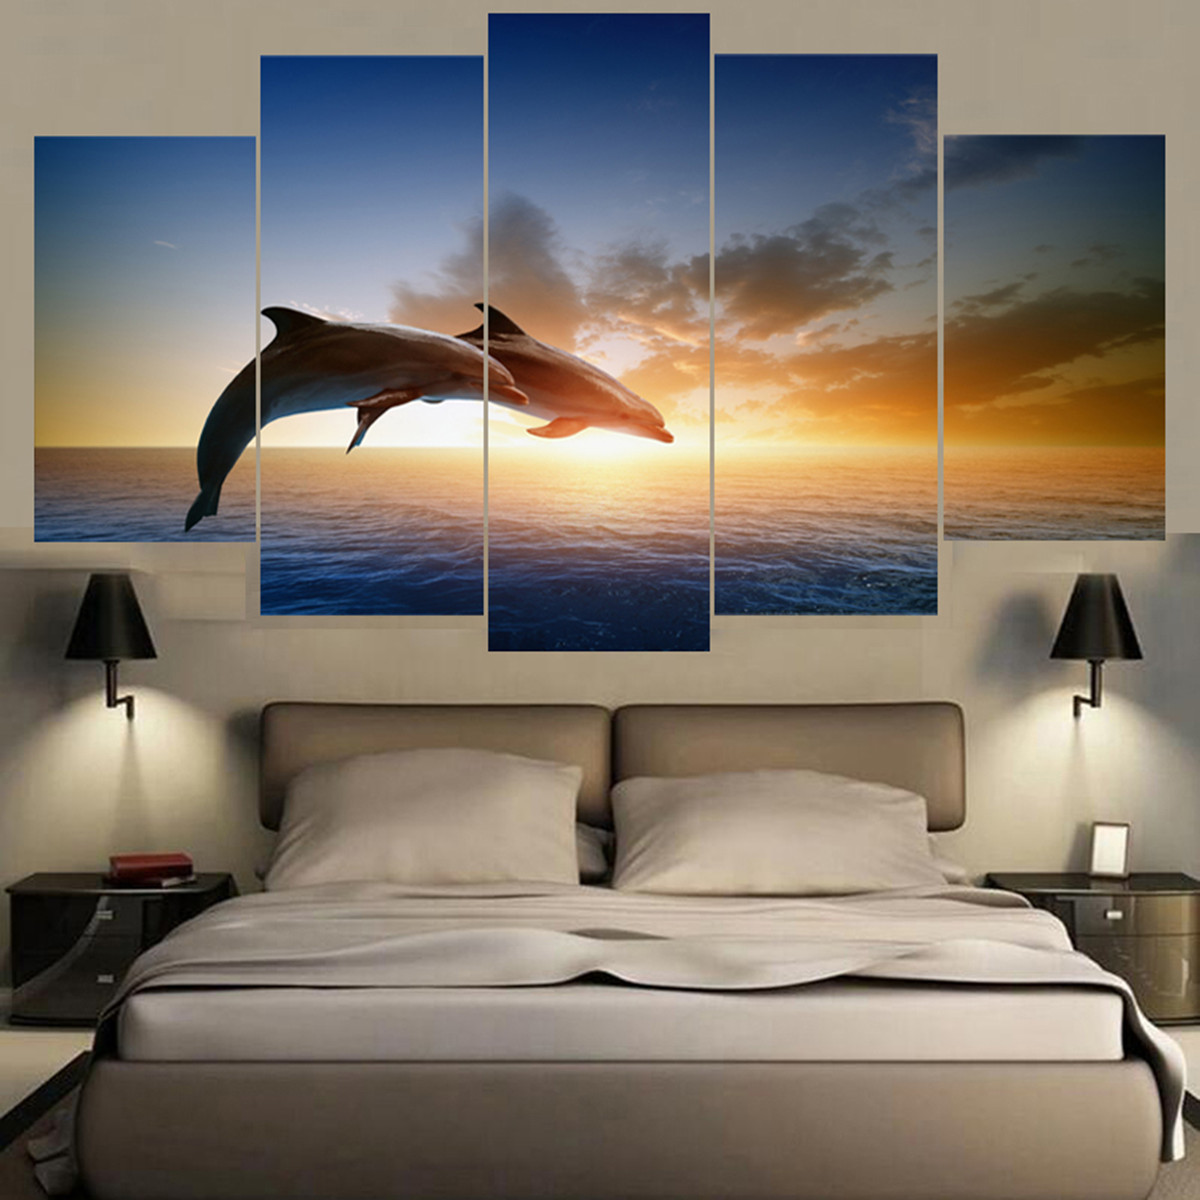 Dolphin-Sunset-Canvas-Print-Paintings-Poster-Wall-Art-Picture-Home-Decor-Unframed-1638931-2